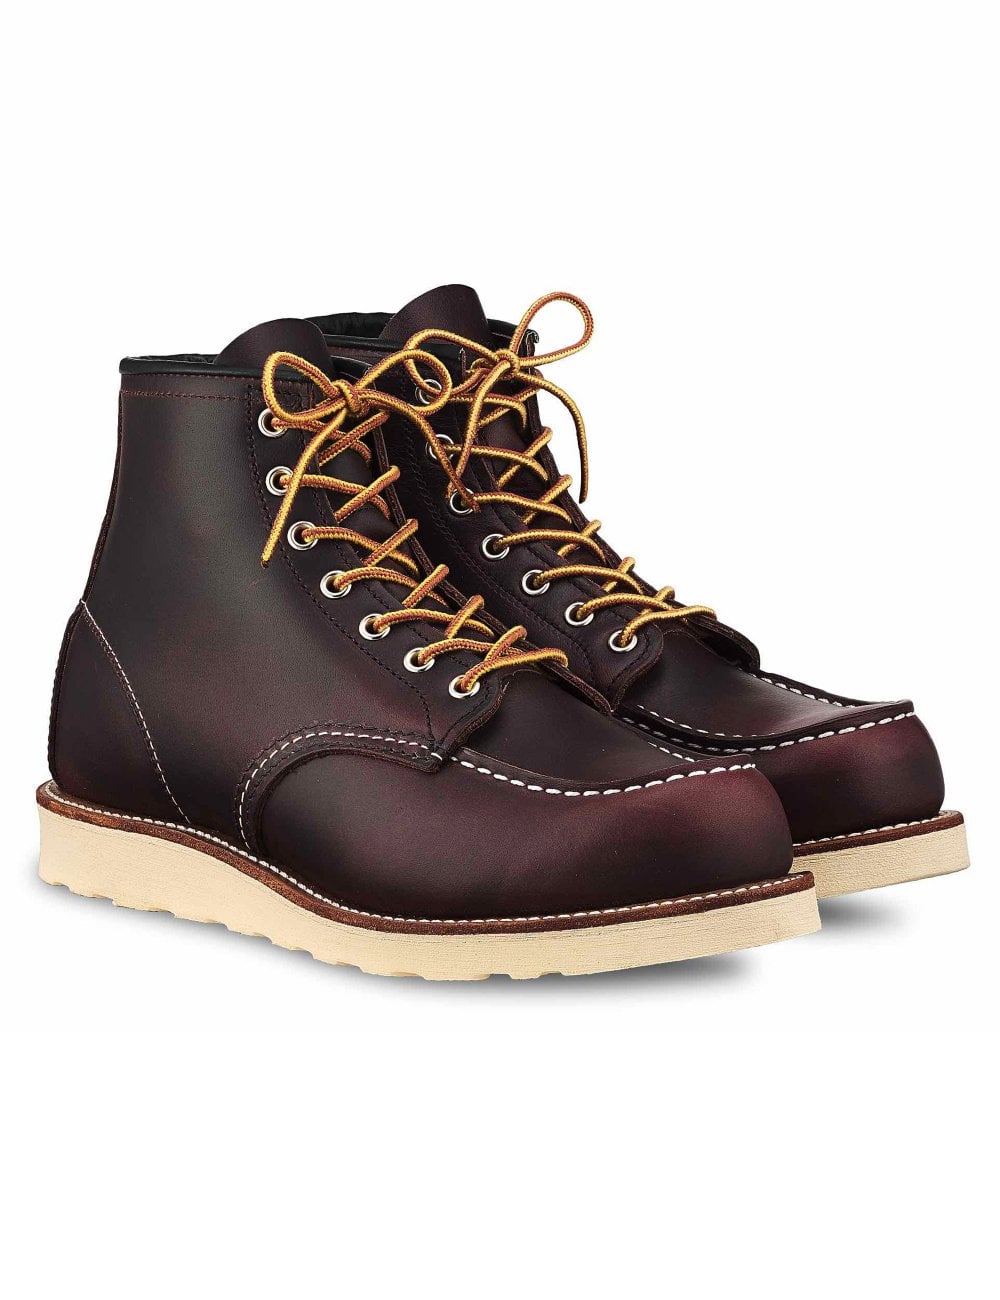 Red Wing Heritage Men's #8847 6" Moc Toe Boot - Black Cherry Excalibur Leather